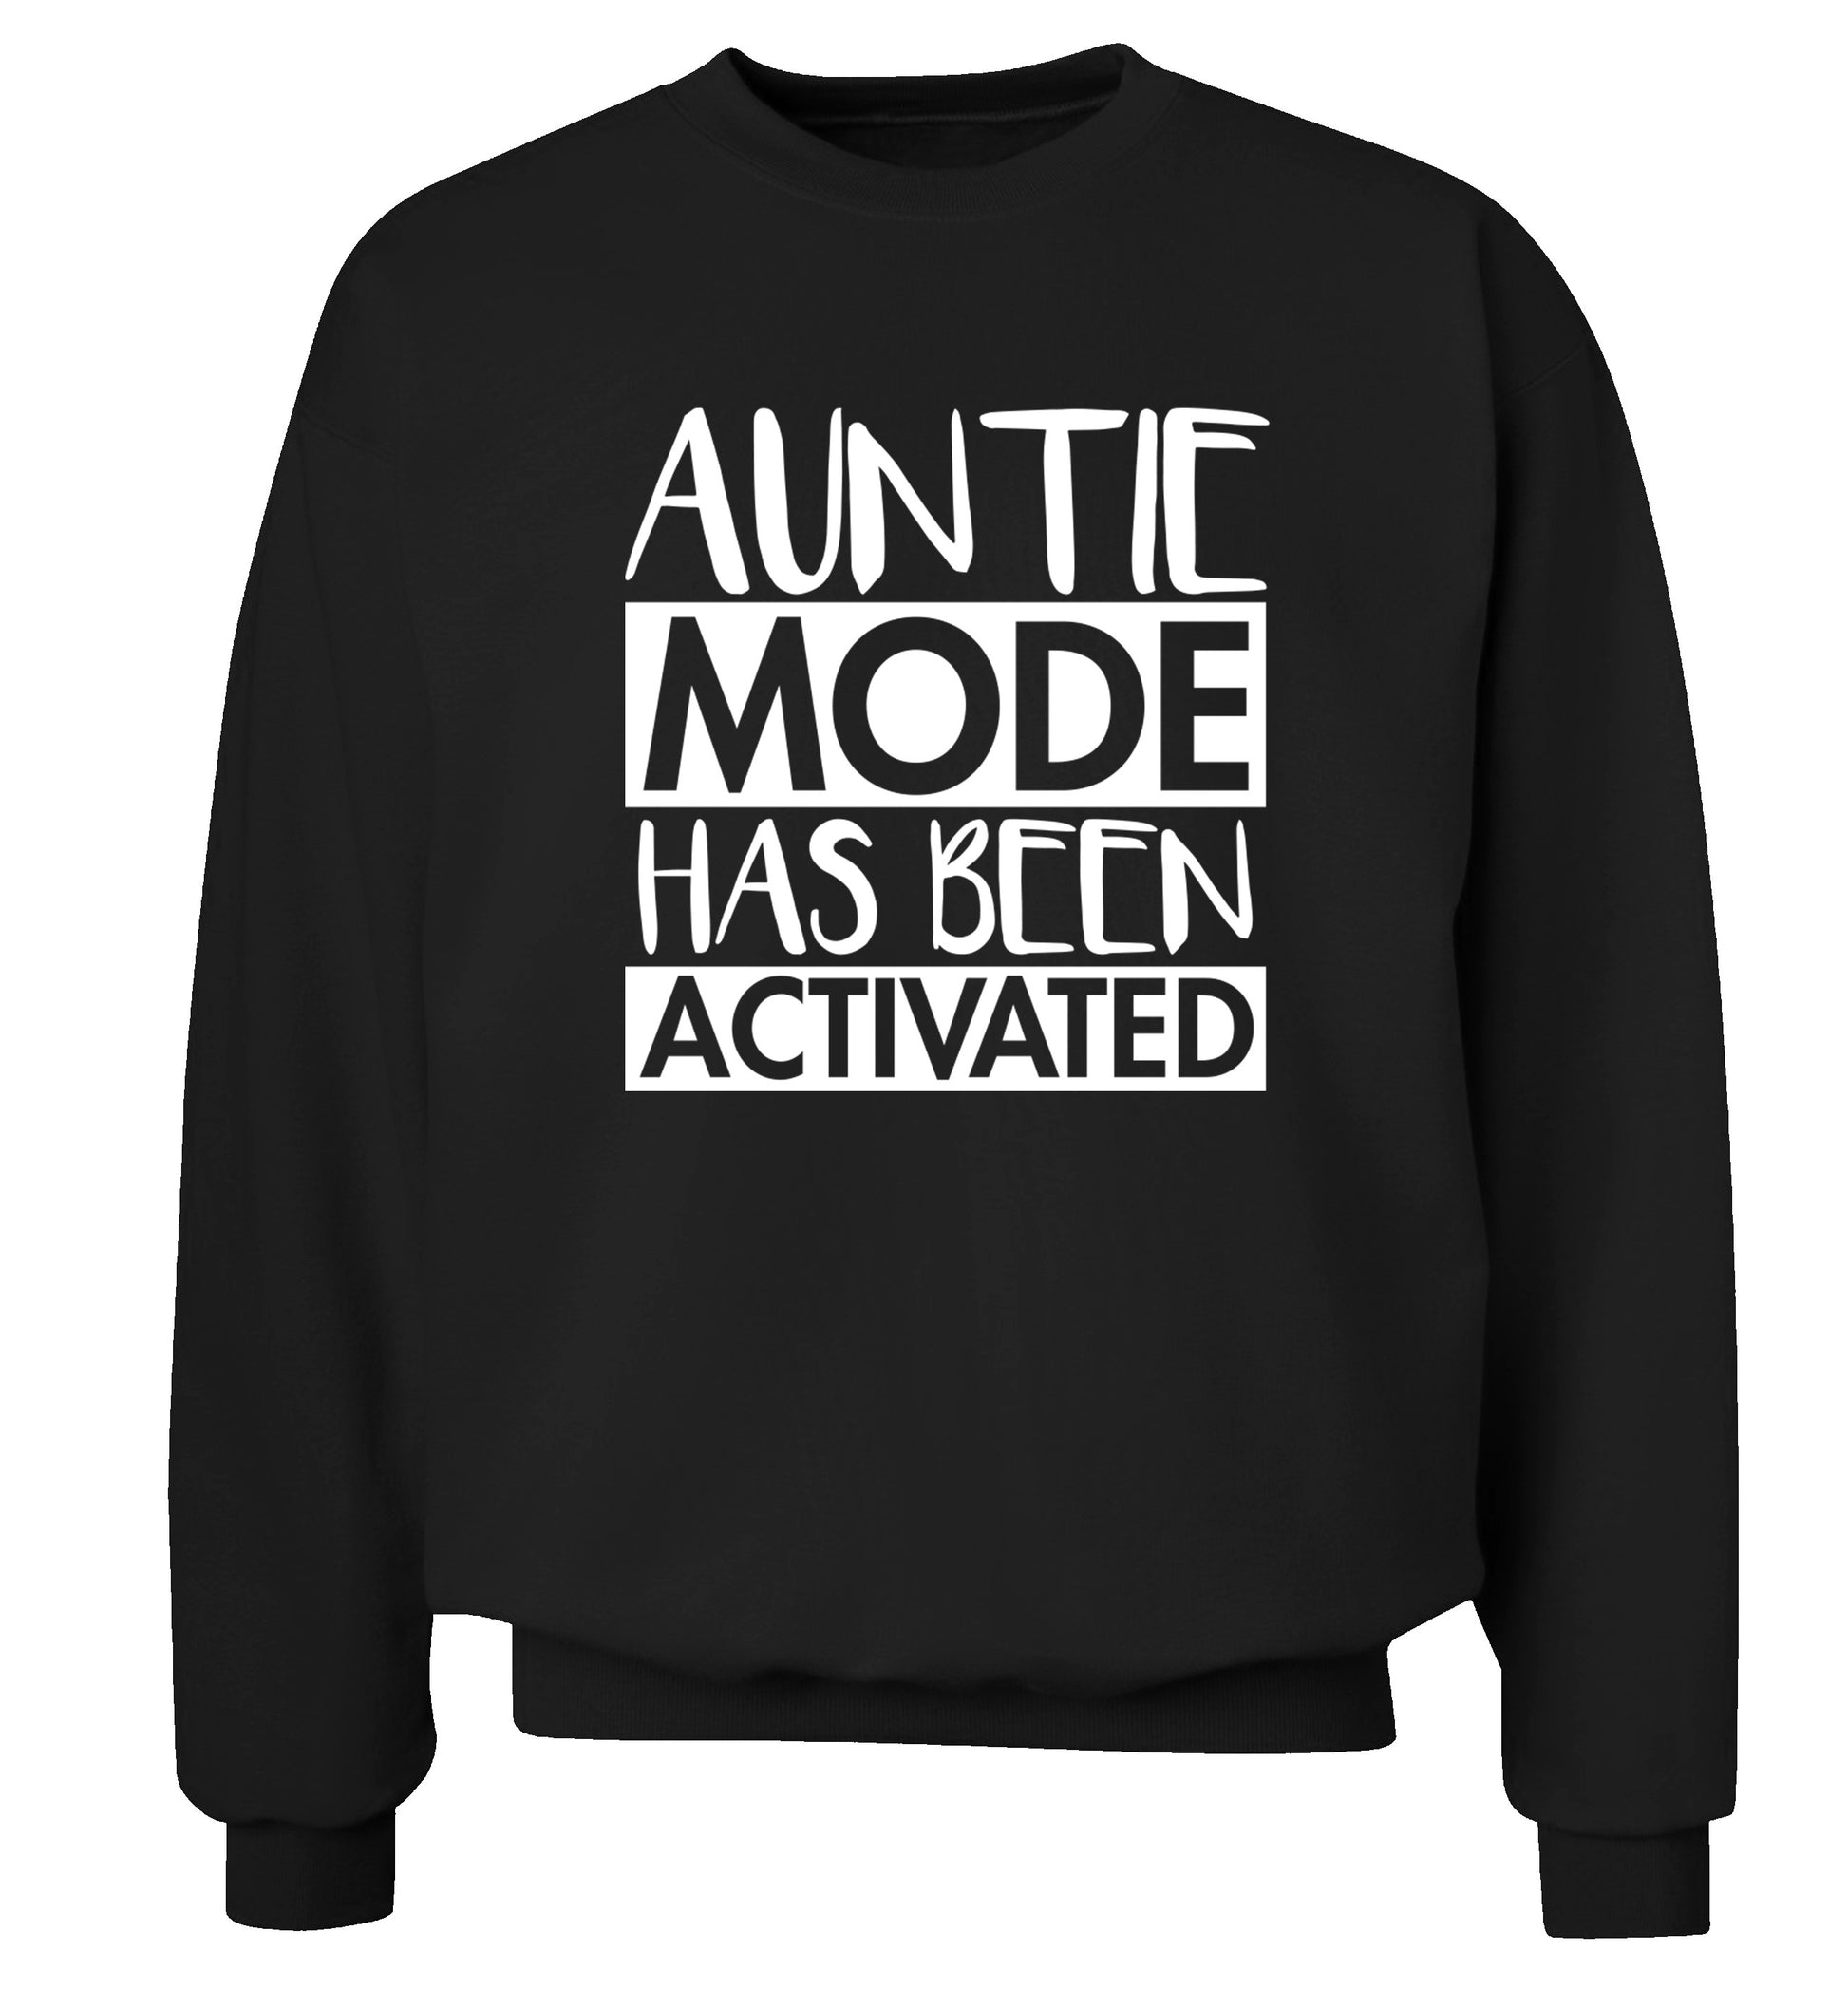 Auntie mode activated Adult's unisex black Sweater 2XL